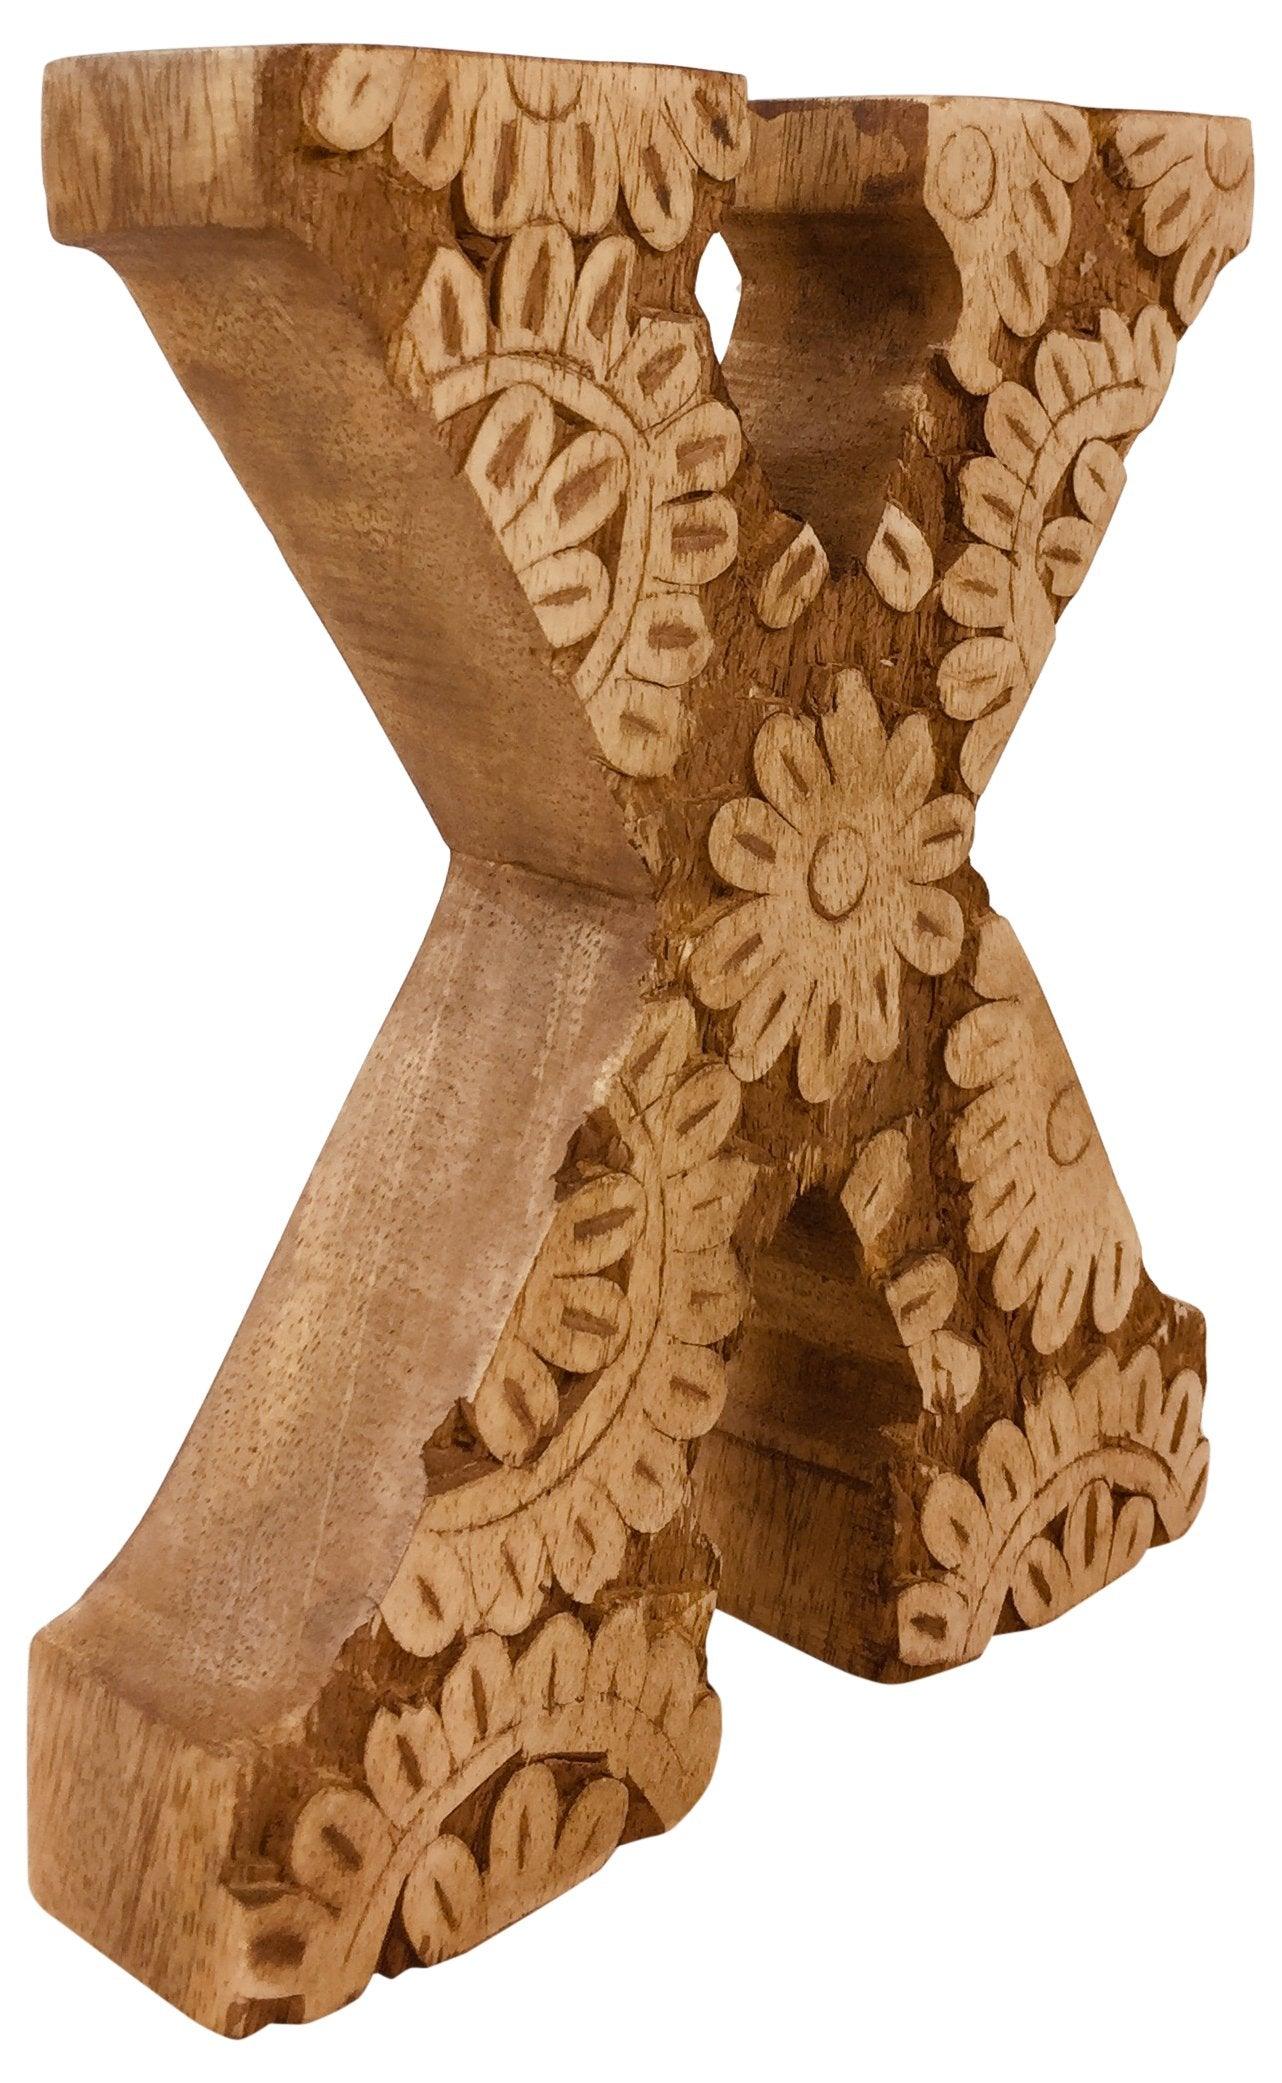 View Hand Carved Wooden Flower Letter X information